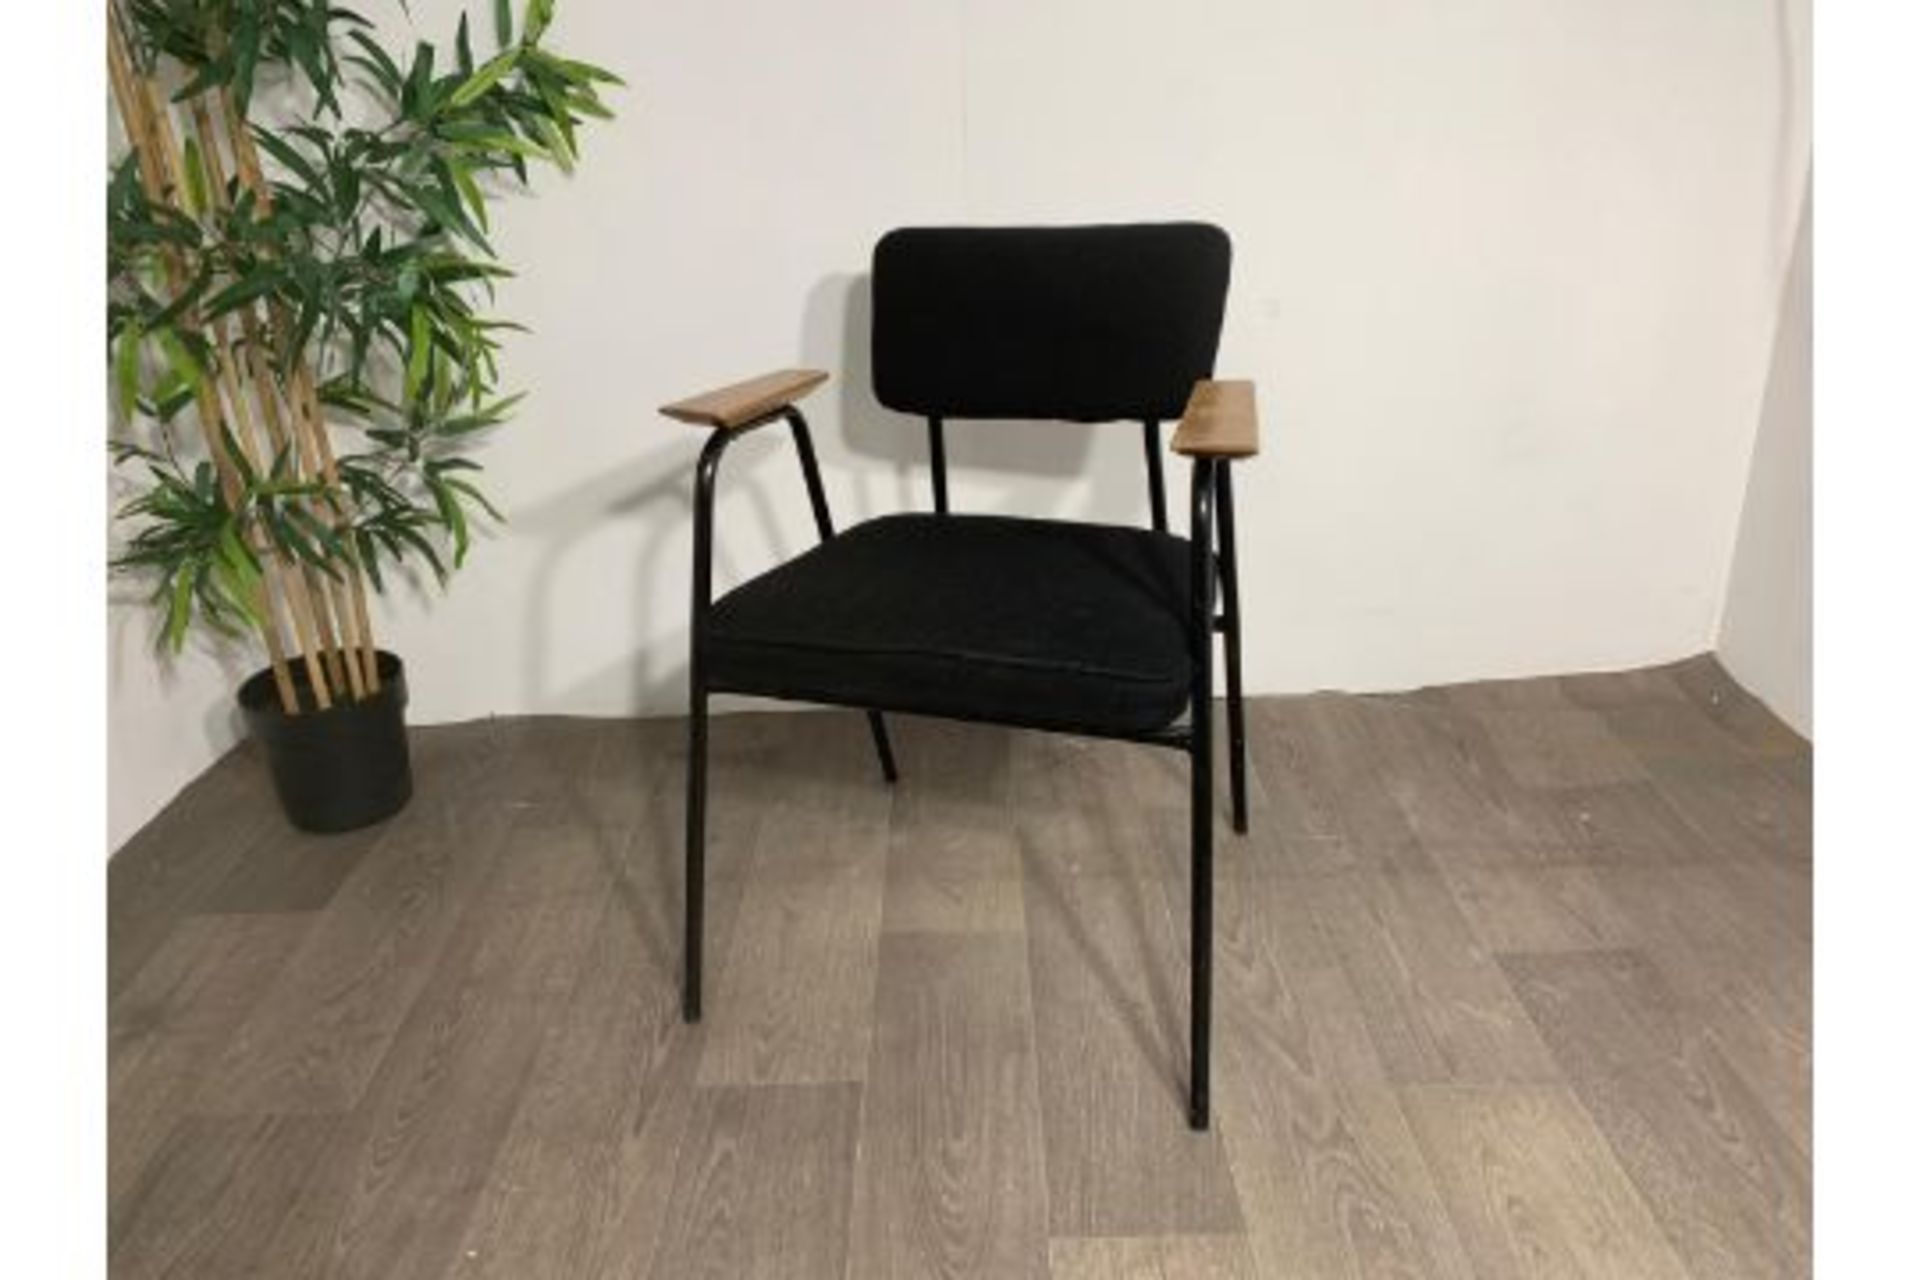 Black Commercial Grade Chair with Wooden Arm Rest x2 - Image 4 of 5